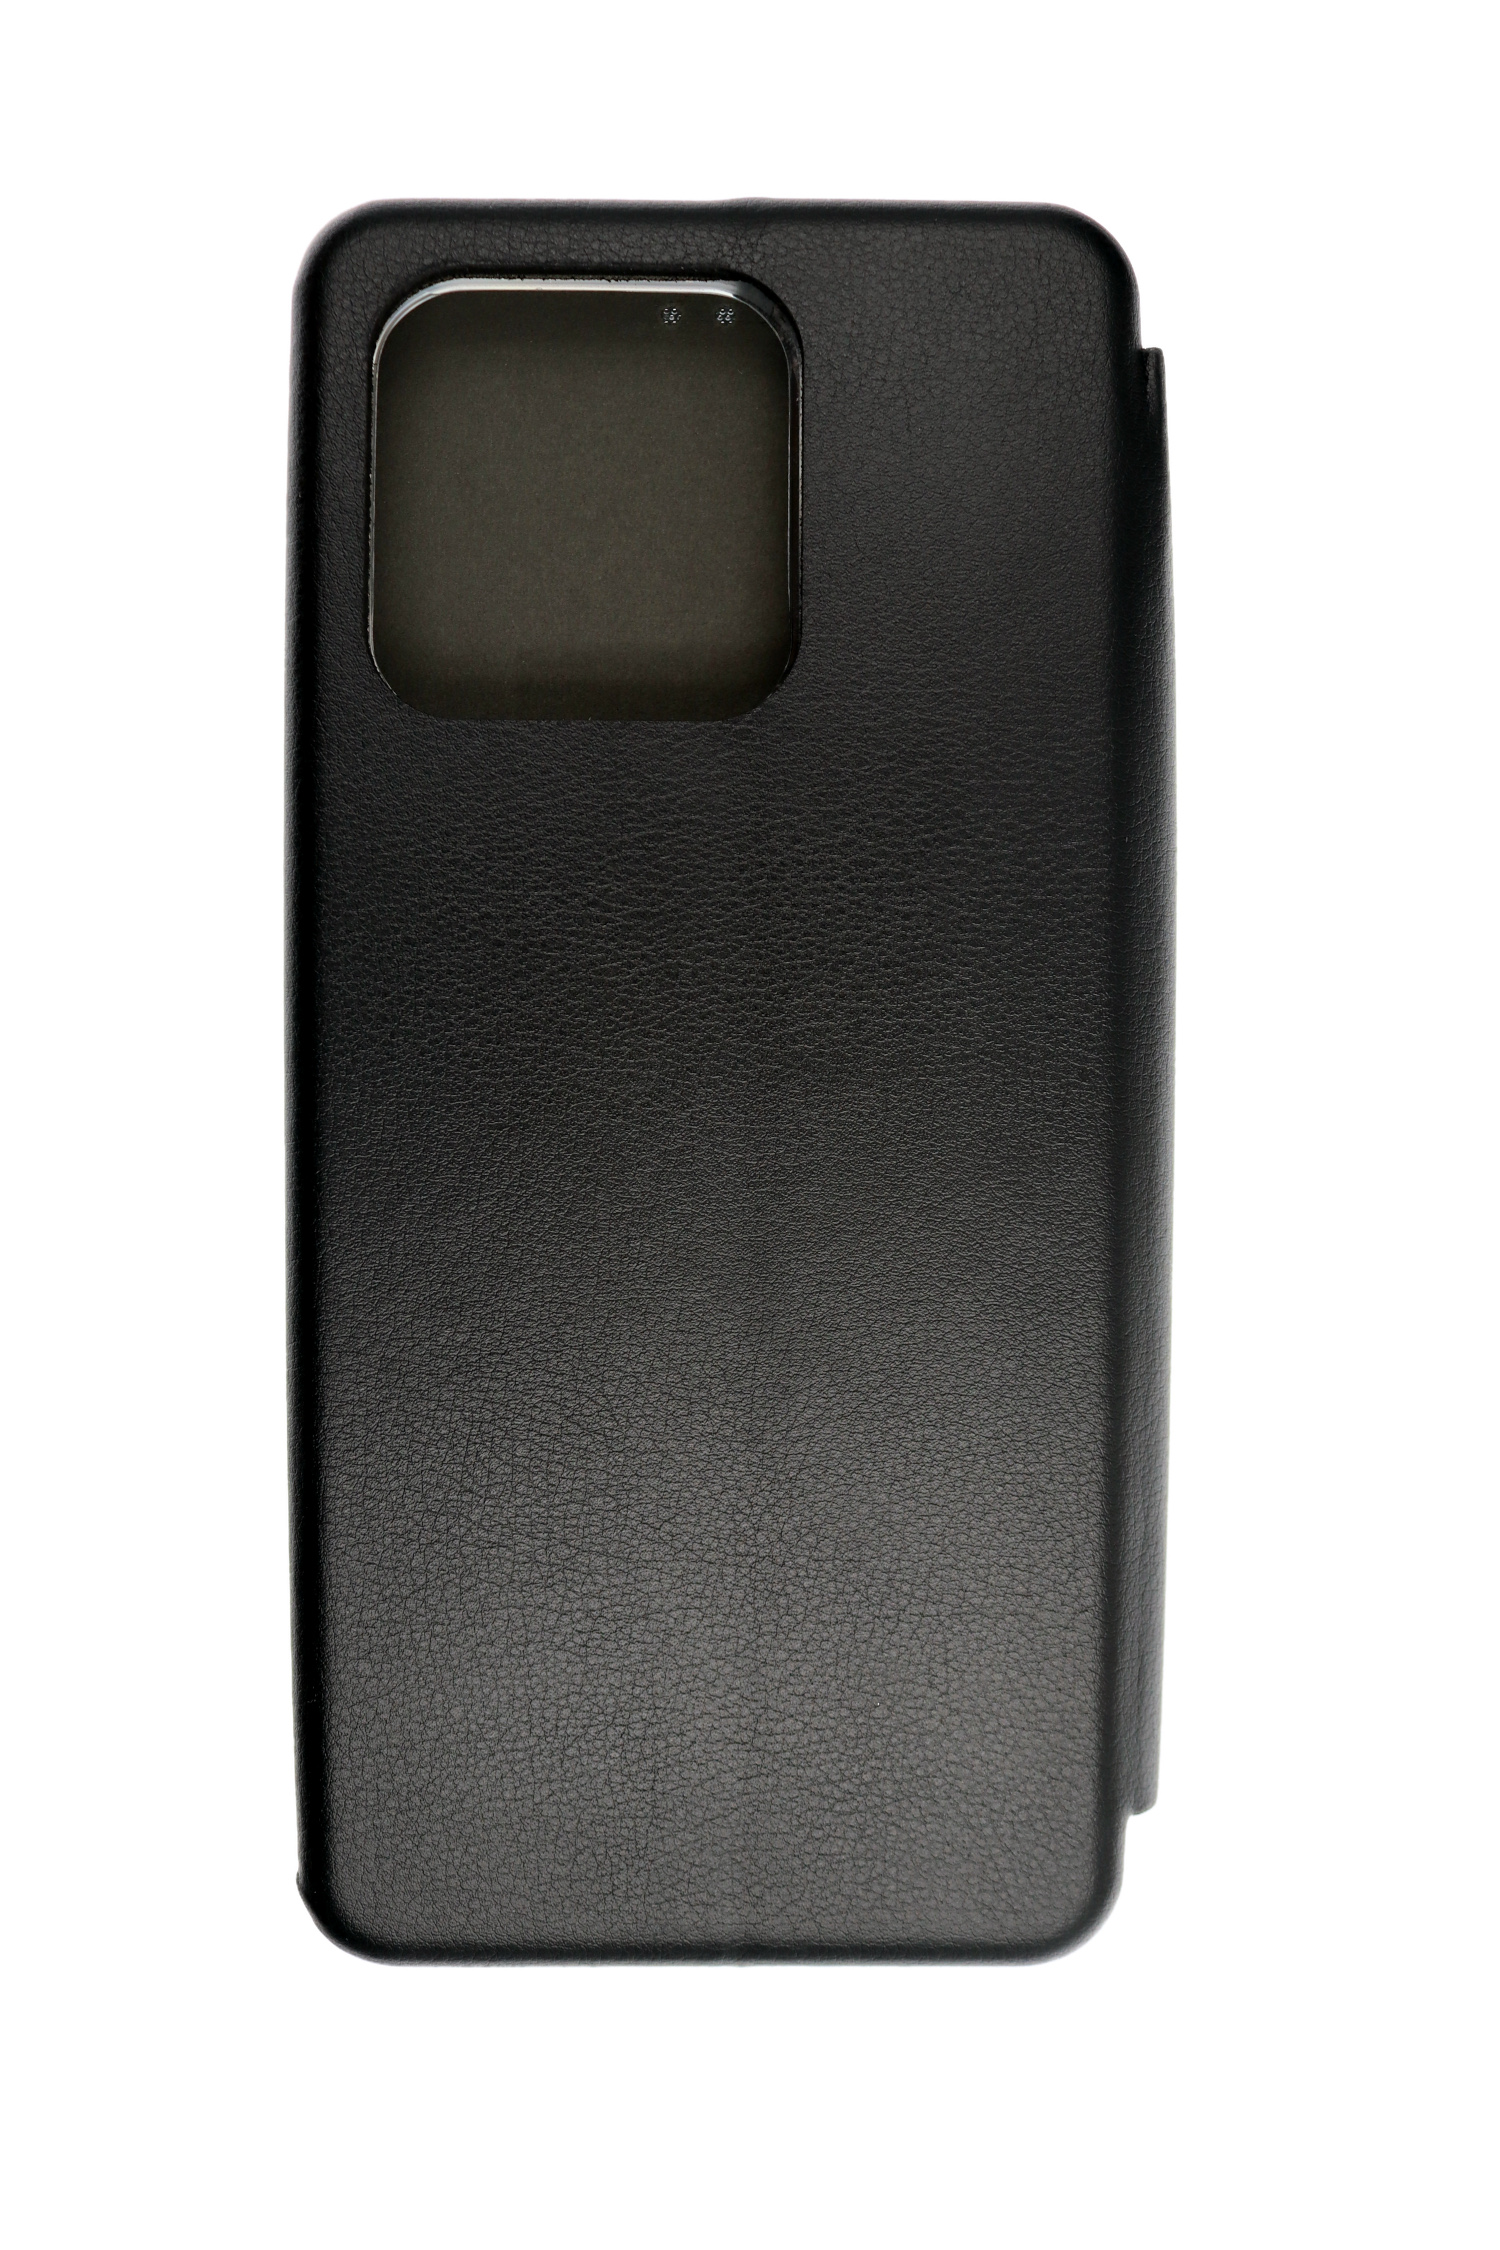 10C, Redmi JAMCOVER Xiaomi, Schwarz Rounded, Bookcase Bookcover,